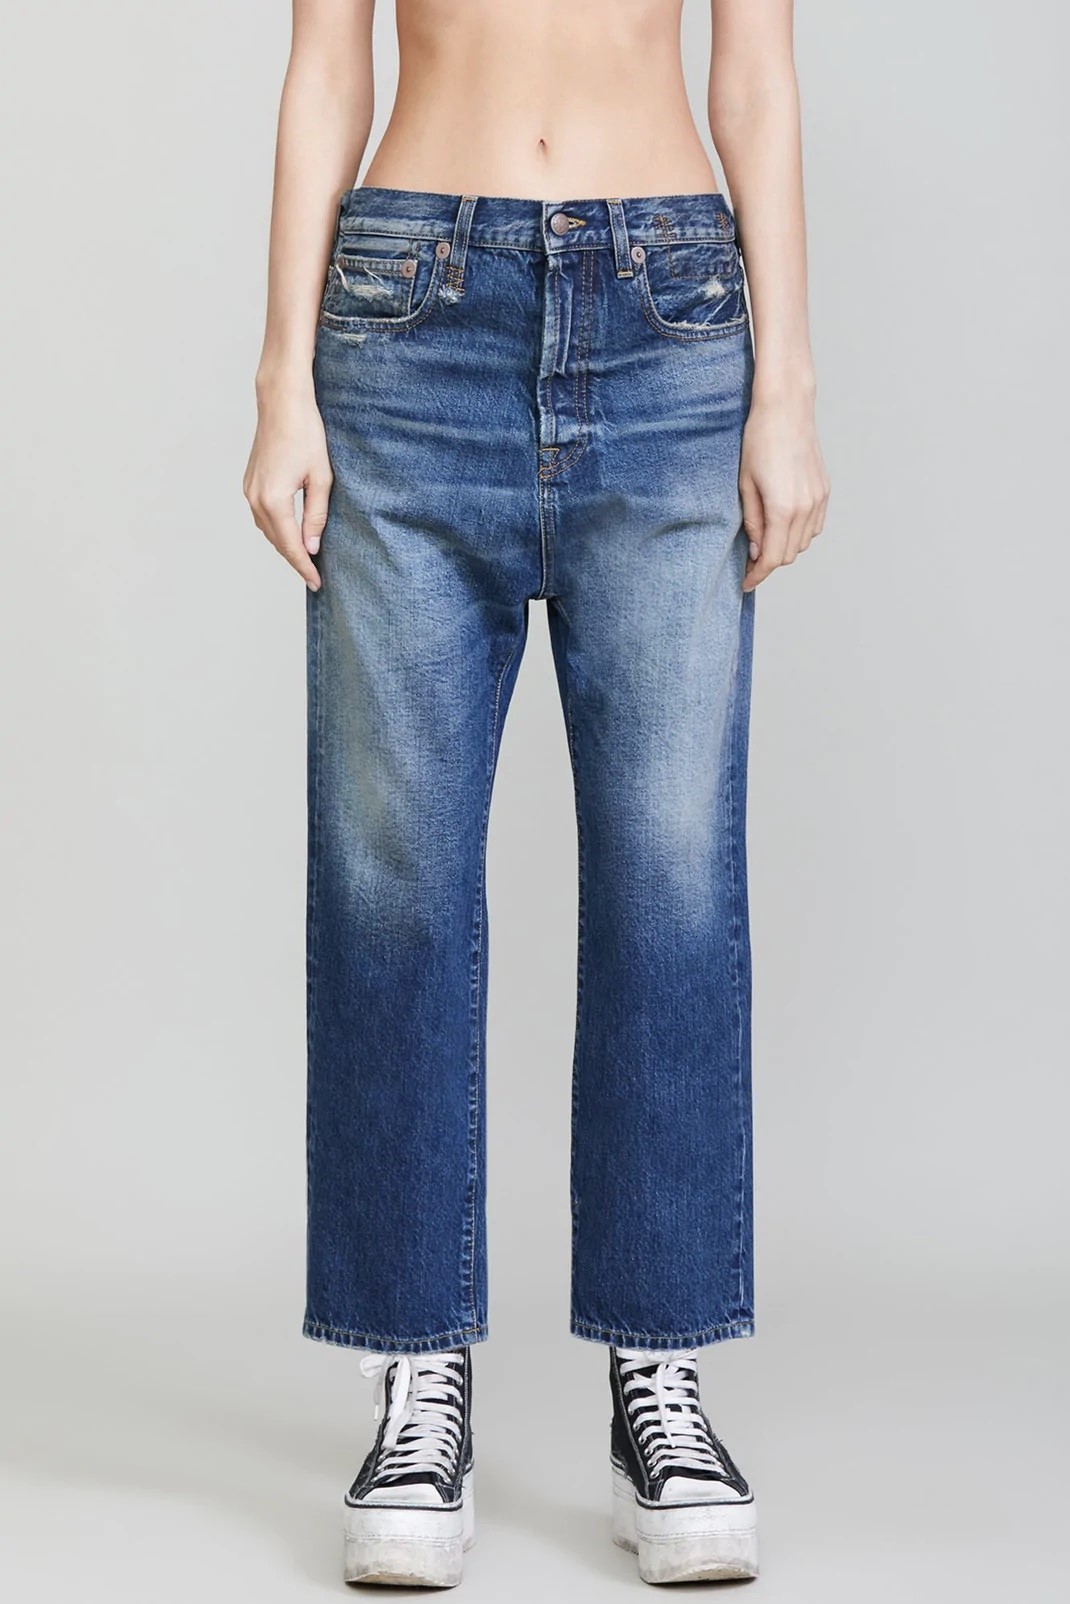 R13 Tailored Drop Jeans in Kyle Washing 28